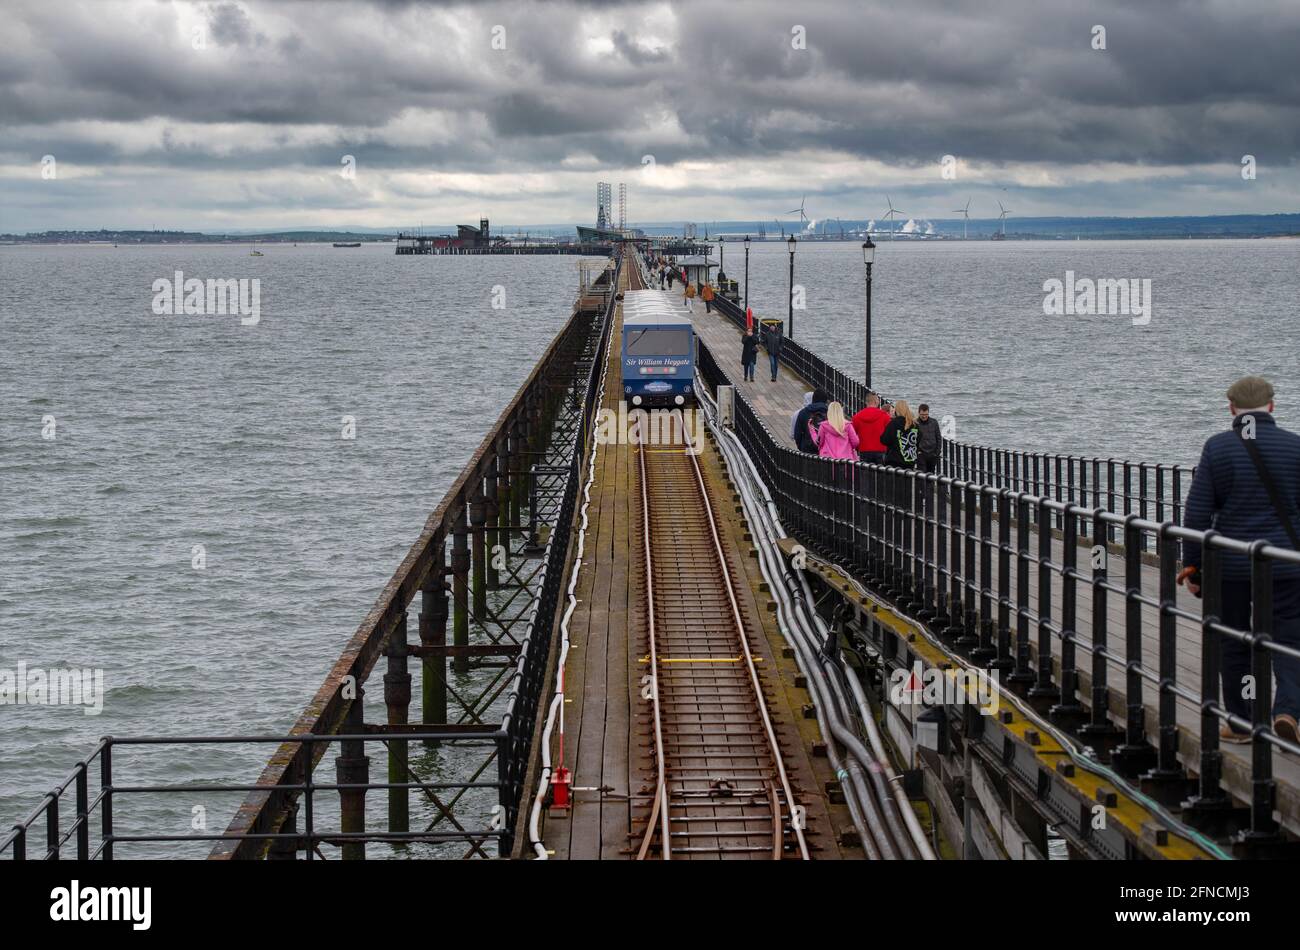 Southend on Sea Essex England UK 15 May 2021 The Sir William Heygate train on the pier, named after former Lord Mayor of London. He also led the publi Stock Photo